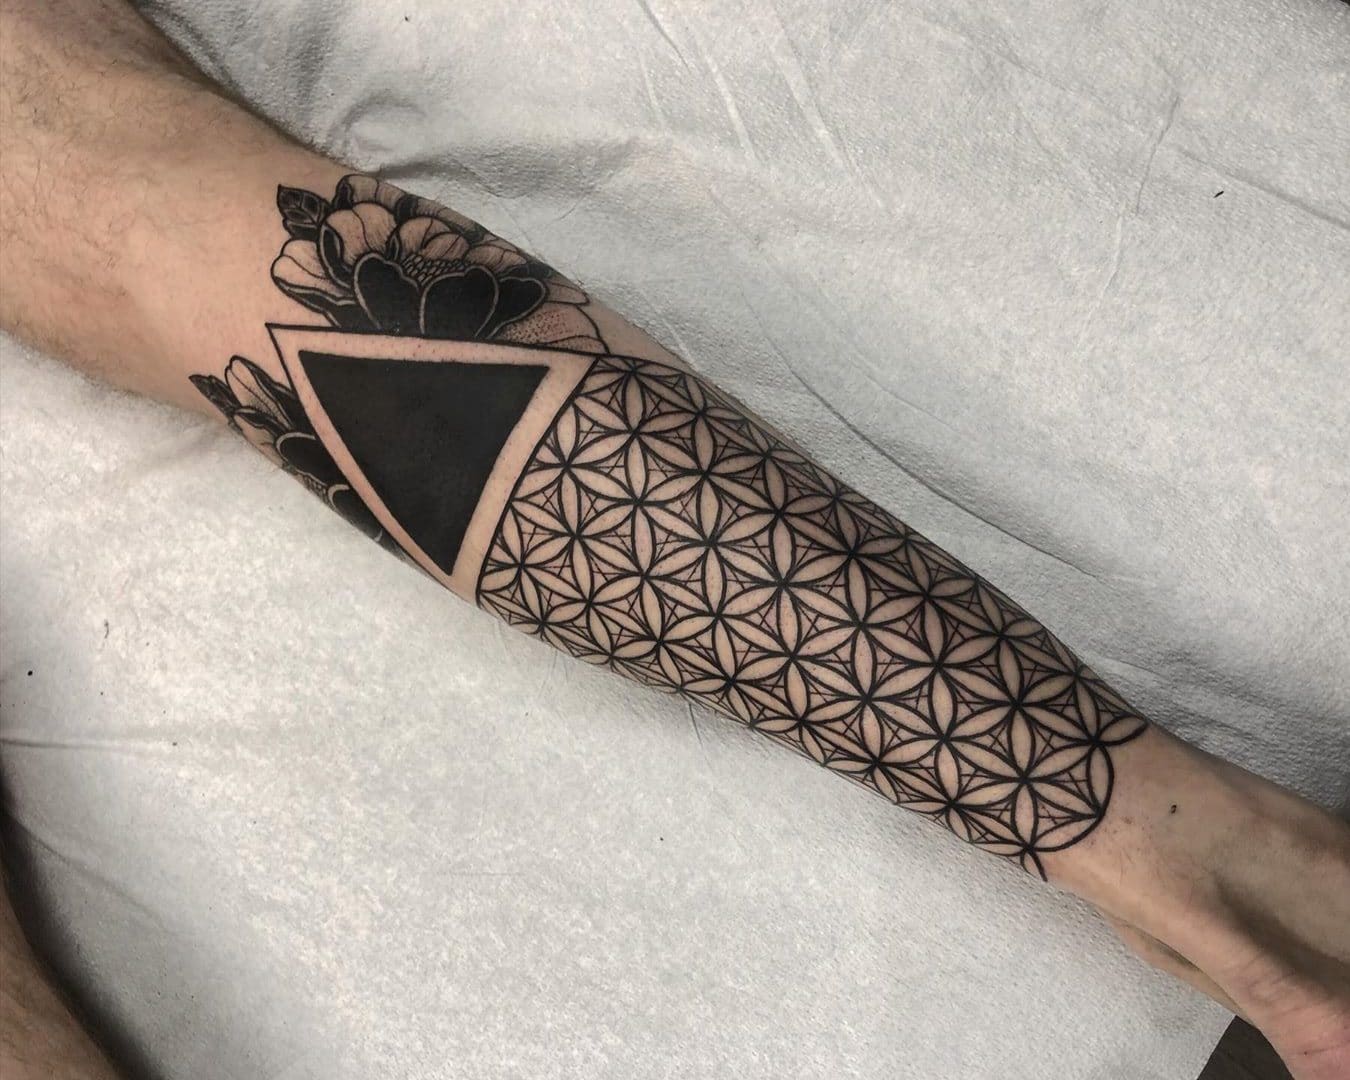 101 Amazing Blackout Tattoo Ideas You Need To See! - Outsons